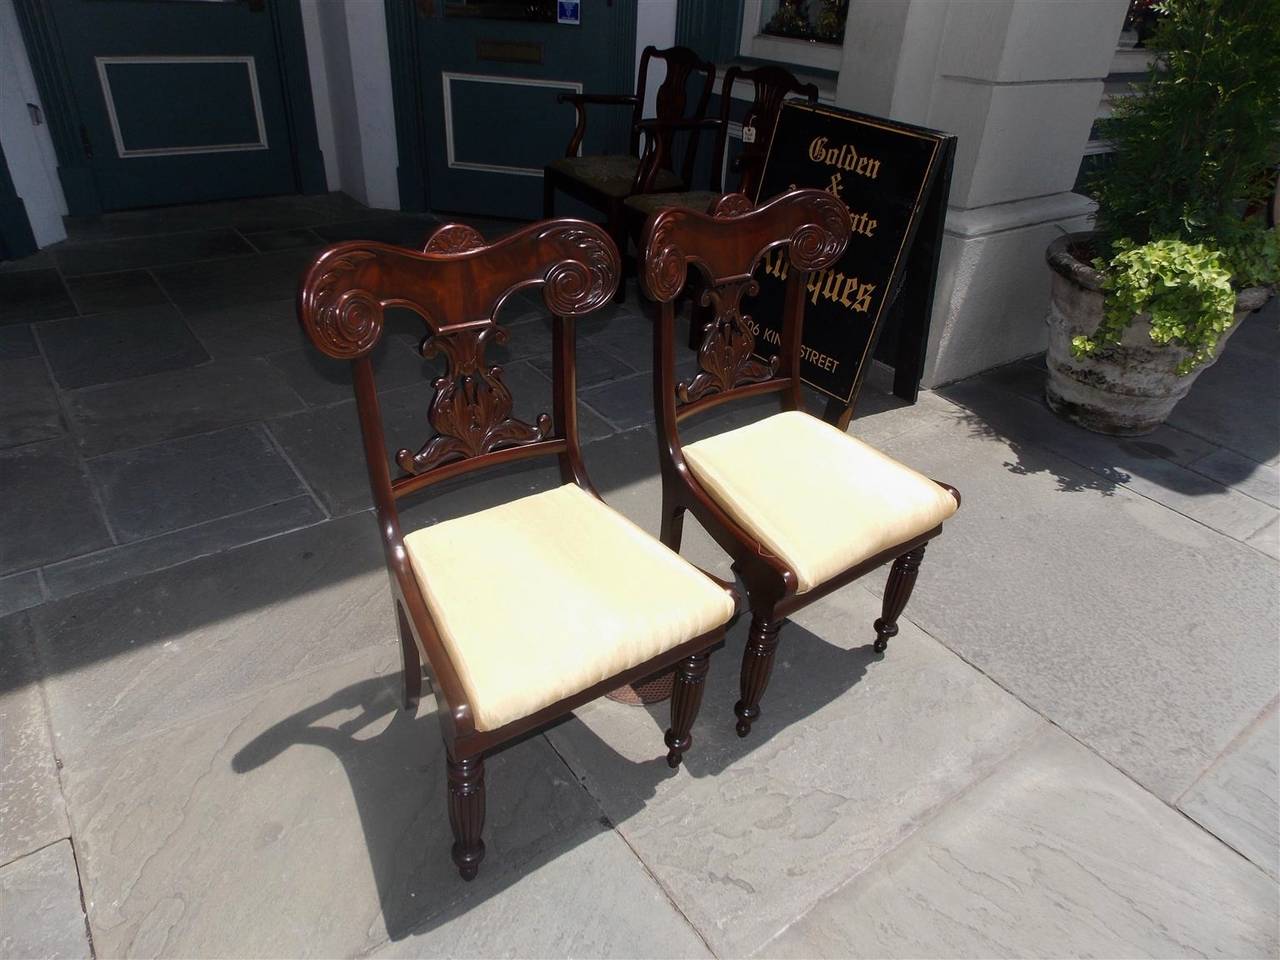 Pair of Caribbean mahogany side chairs with carved scrolled acanthus and floral splat backs, upholstered removable seats, and terminating on reeded bulbous legs, Early 19th century.